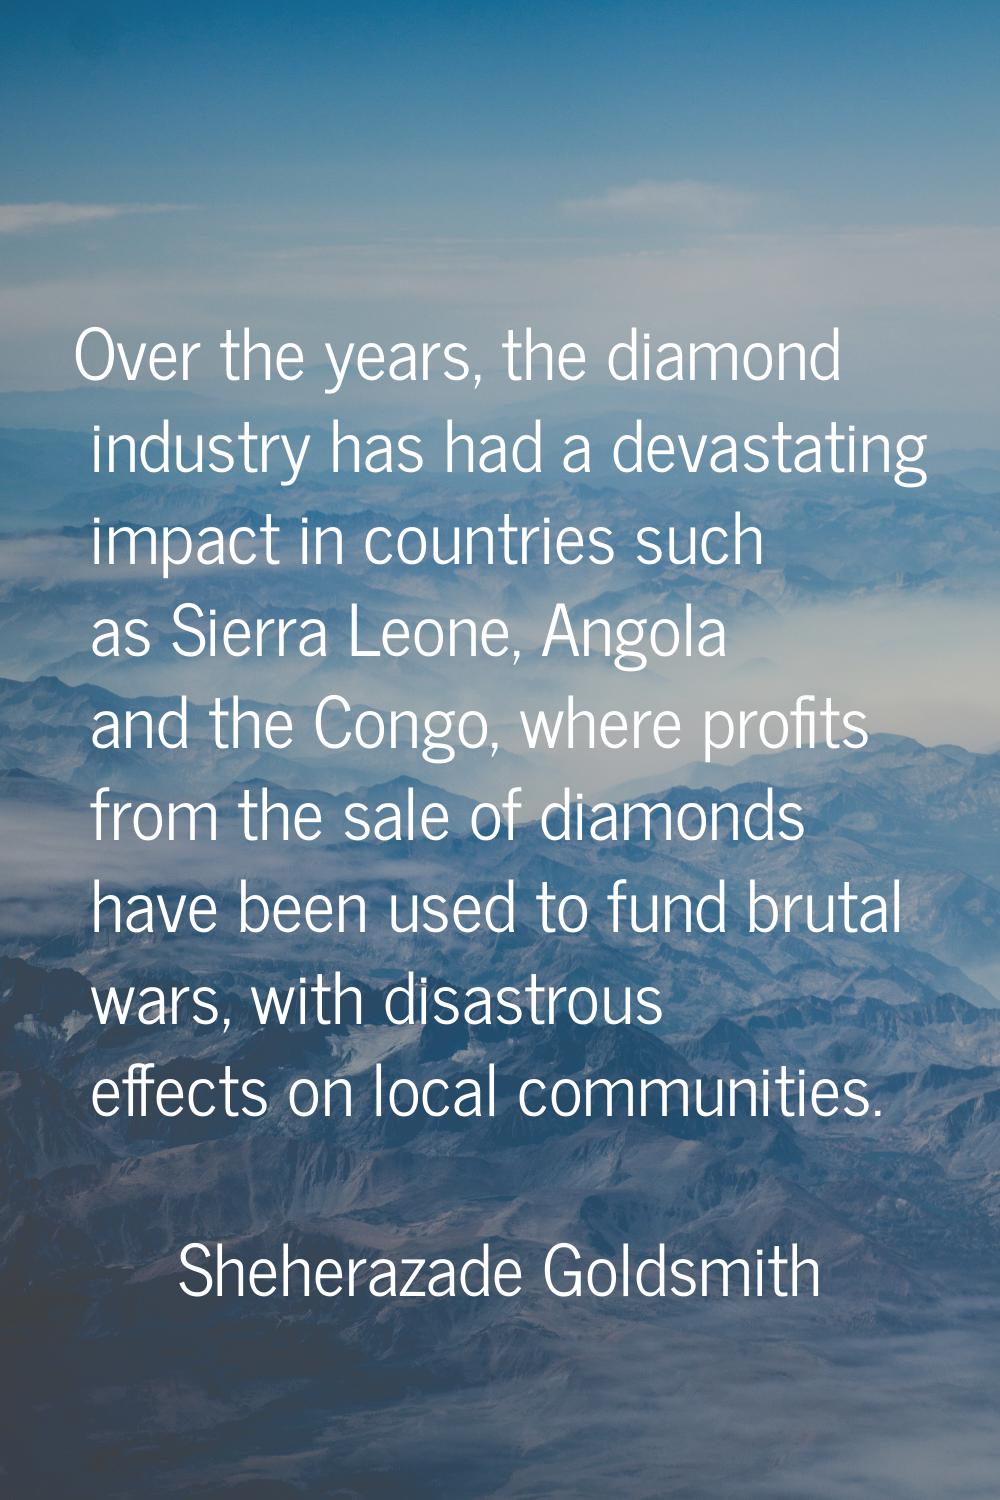 Over the years, the diamond industry has had a devastating impact in countries such as Sierra Leone